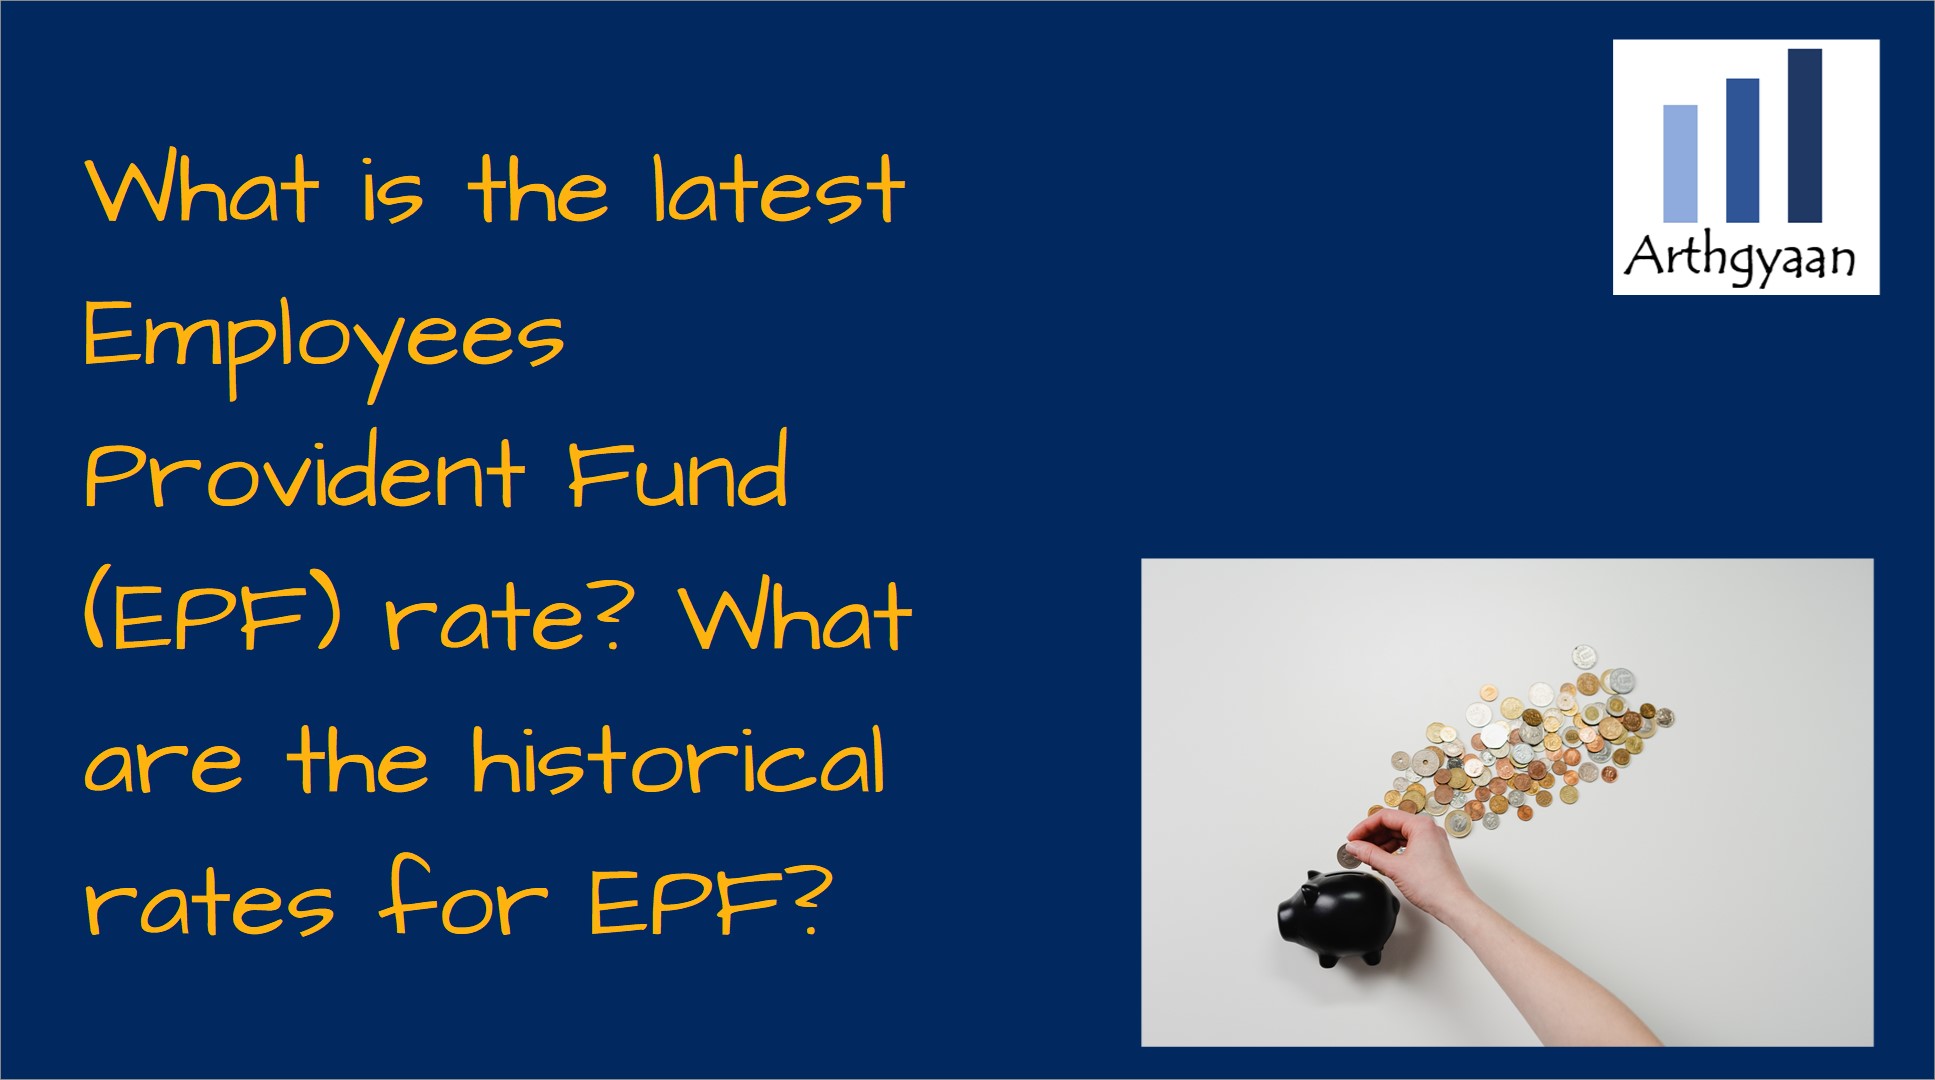 What is the latest Employees Provident Fund (EPF) rate? What are the historical rates for EPF?